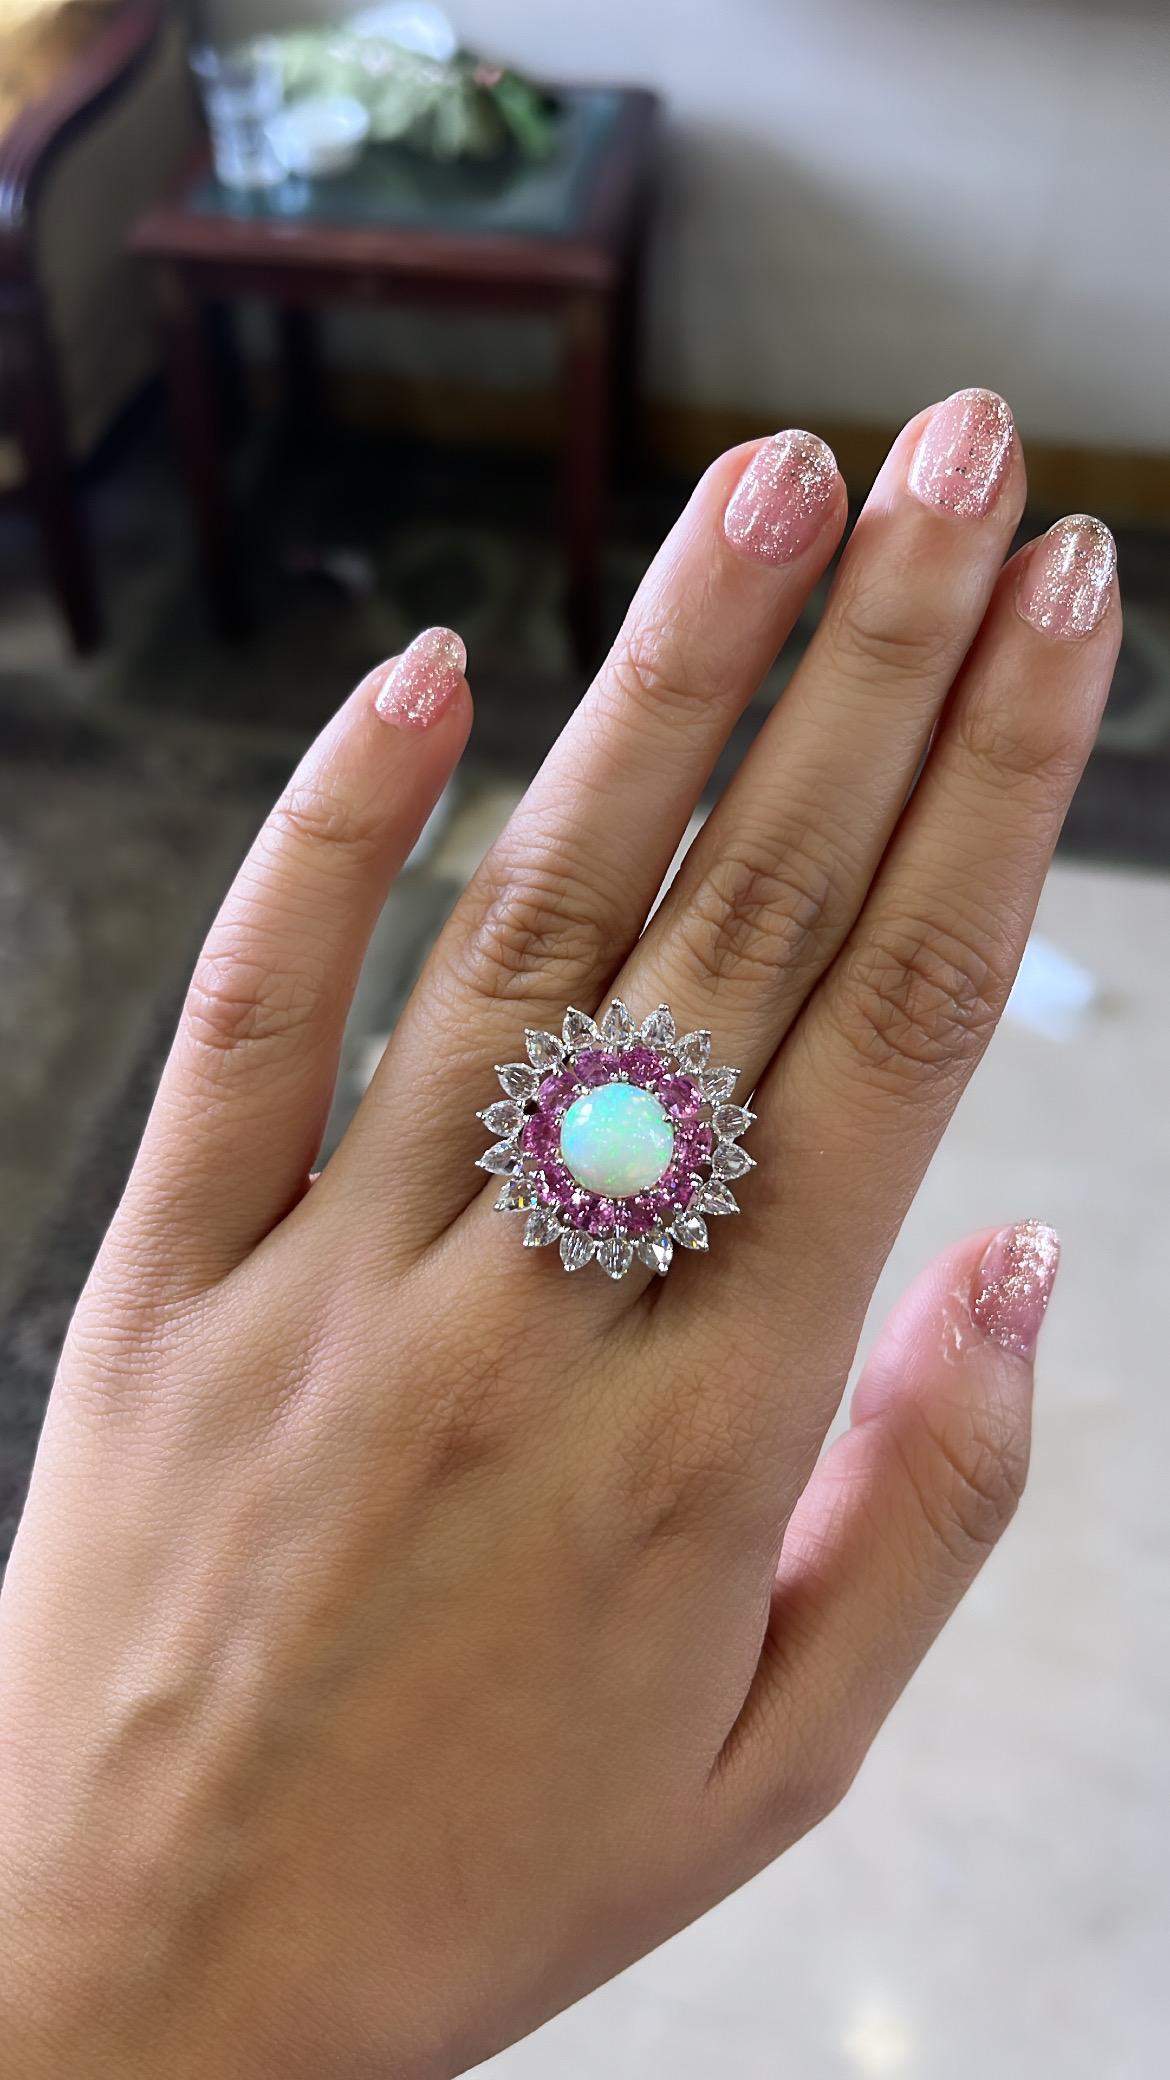 A very beautiful and one of a kind, Opal & Pink Sapphire Cocktail / Dome Ring set in 18K White Gold & Diamonds. The weight of the Opal is 2.60 carats. The Opal is completely natural, without any treatment and is of Ethiopian origin. The weight of